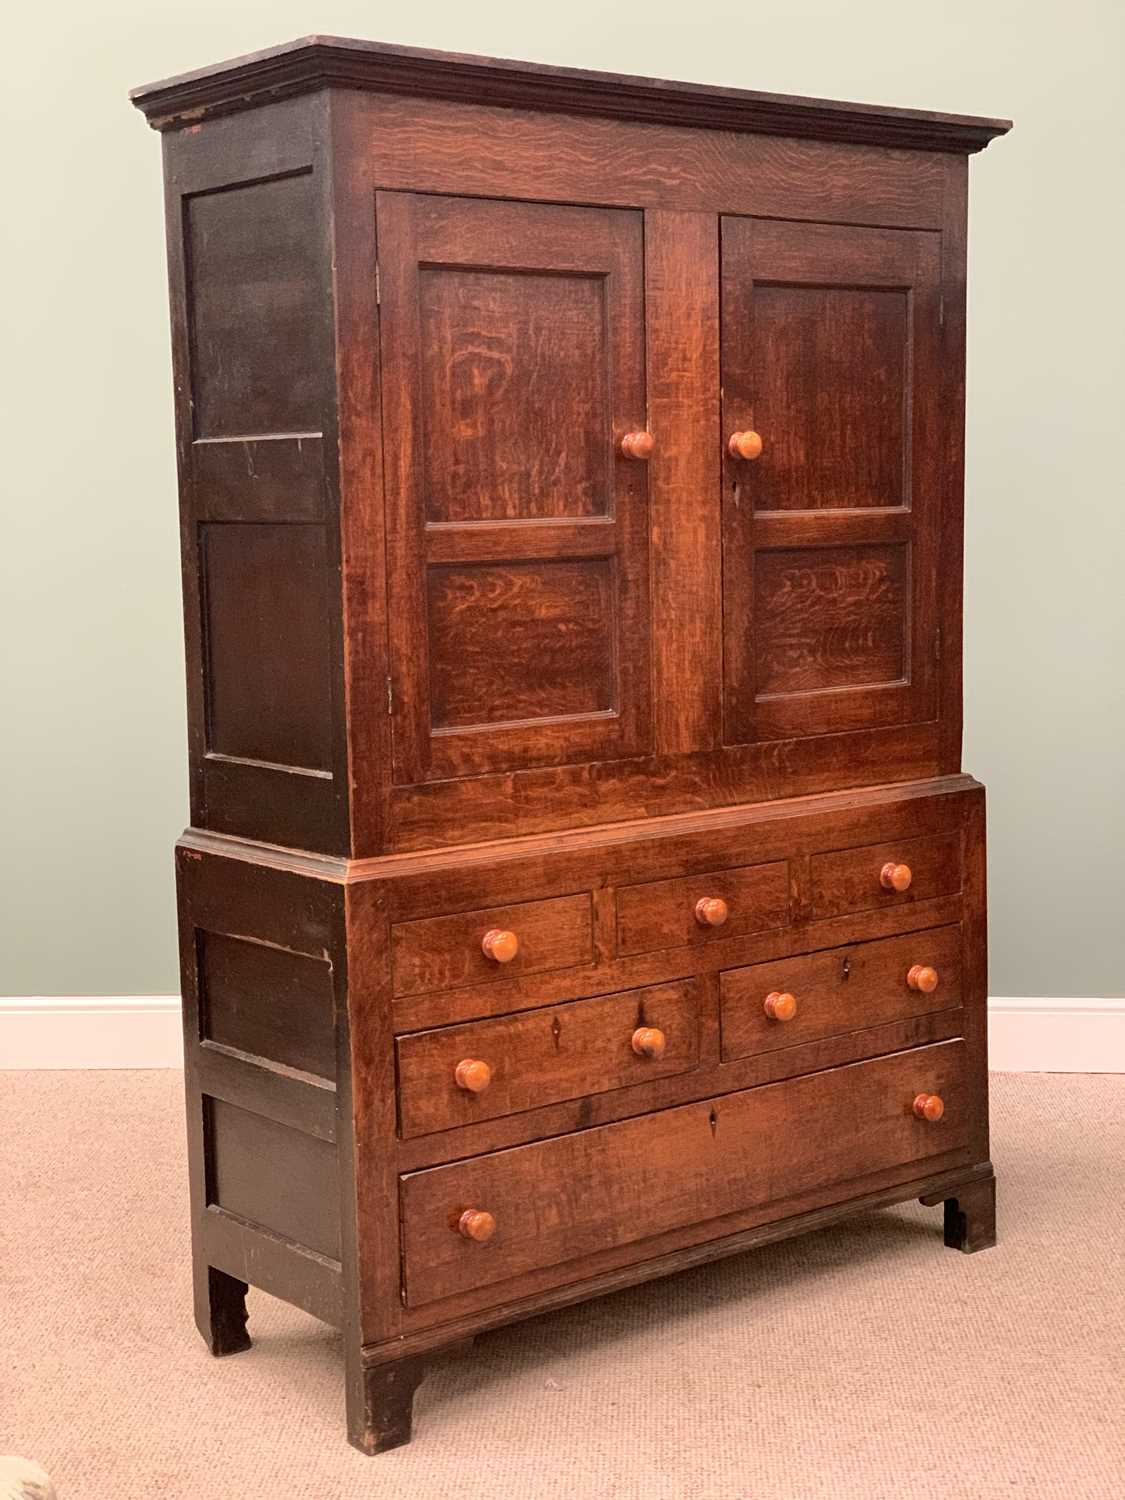 19th CENTURY WELSH OAK PRESS CUPBOARD having two opening doors with fielded panels over a base of - Image 6 of 6